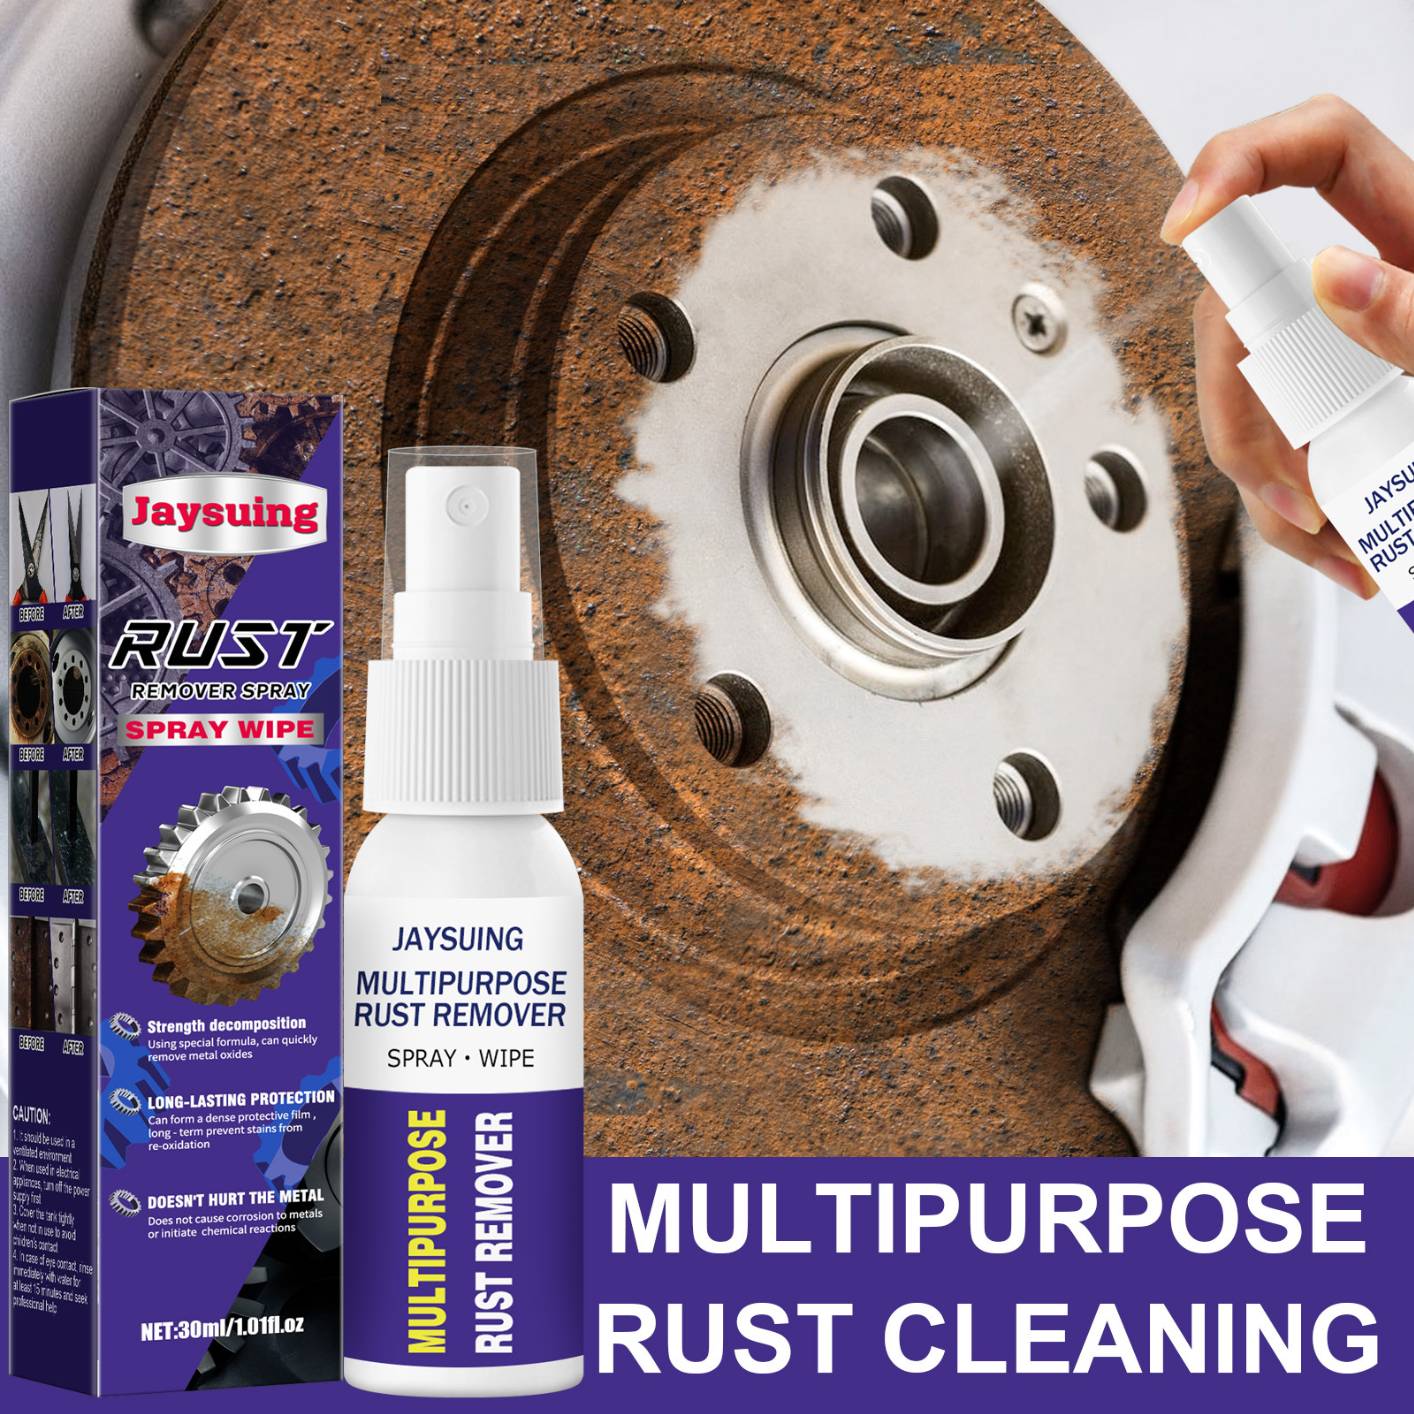 Rust Remover Spray, Rust Removal Agent for Bright Metal Strip for Car Detailing, Multipurpose Car Maintenance Cleaning Derusting Spray, Kitchen Home Cleaning Rust Inhibitors